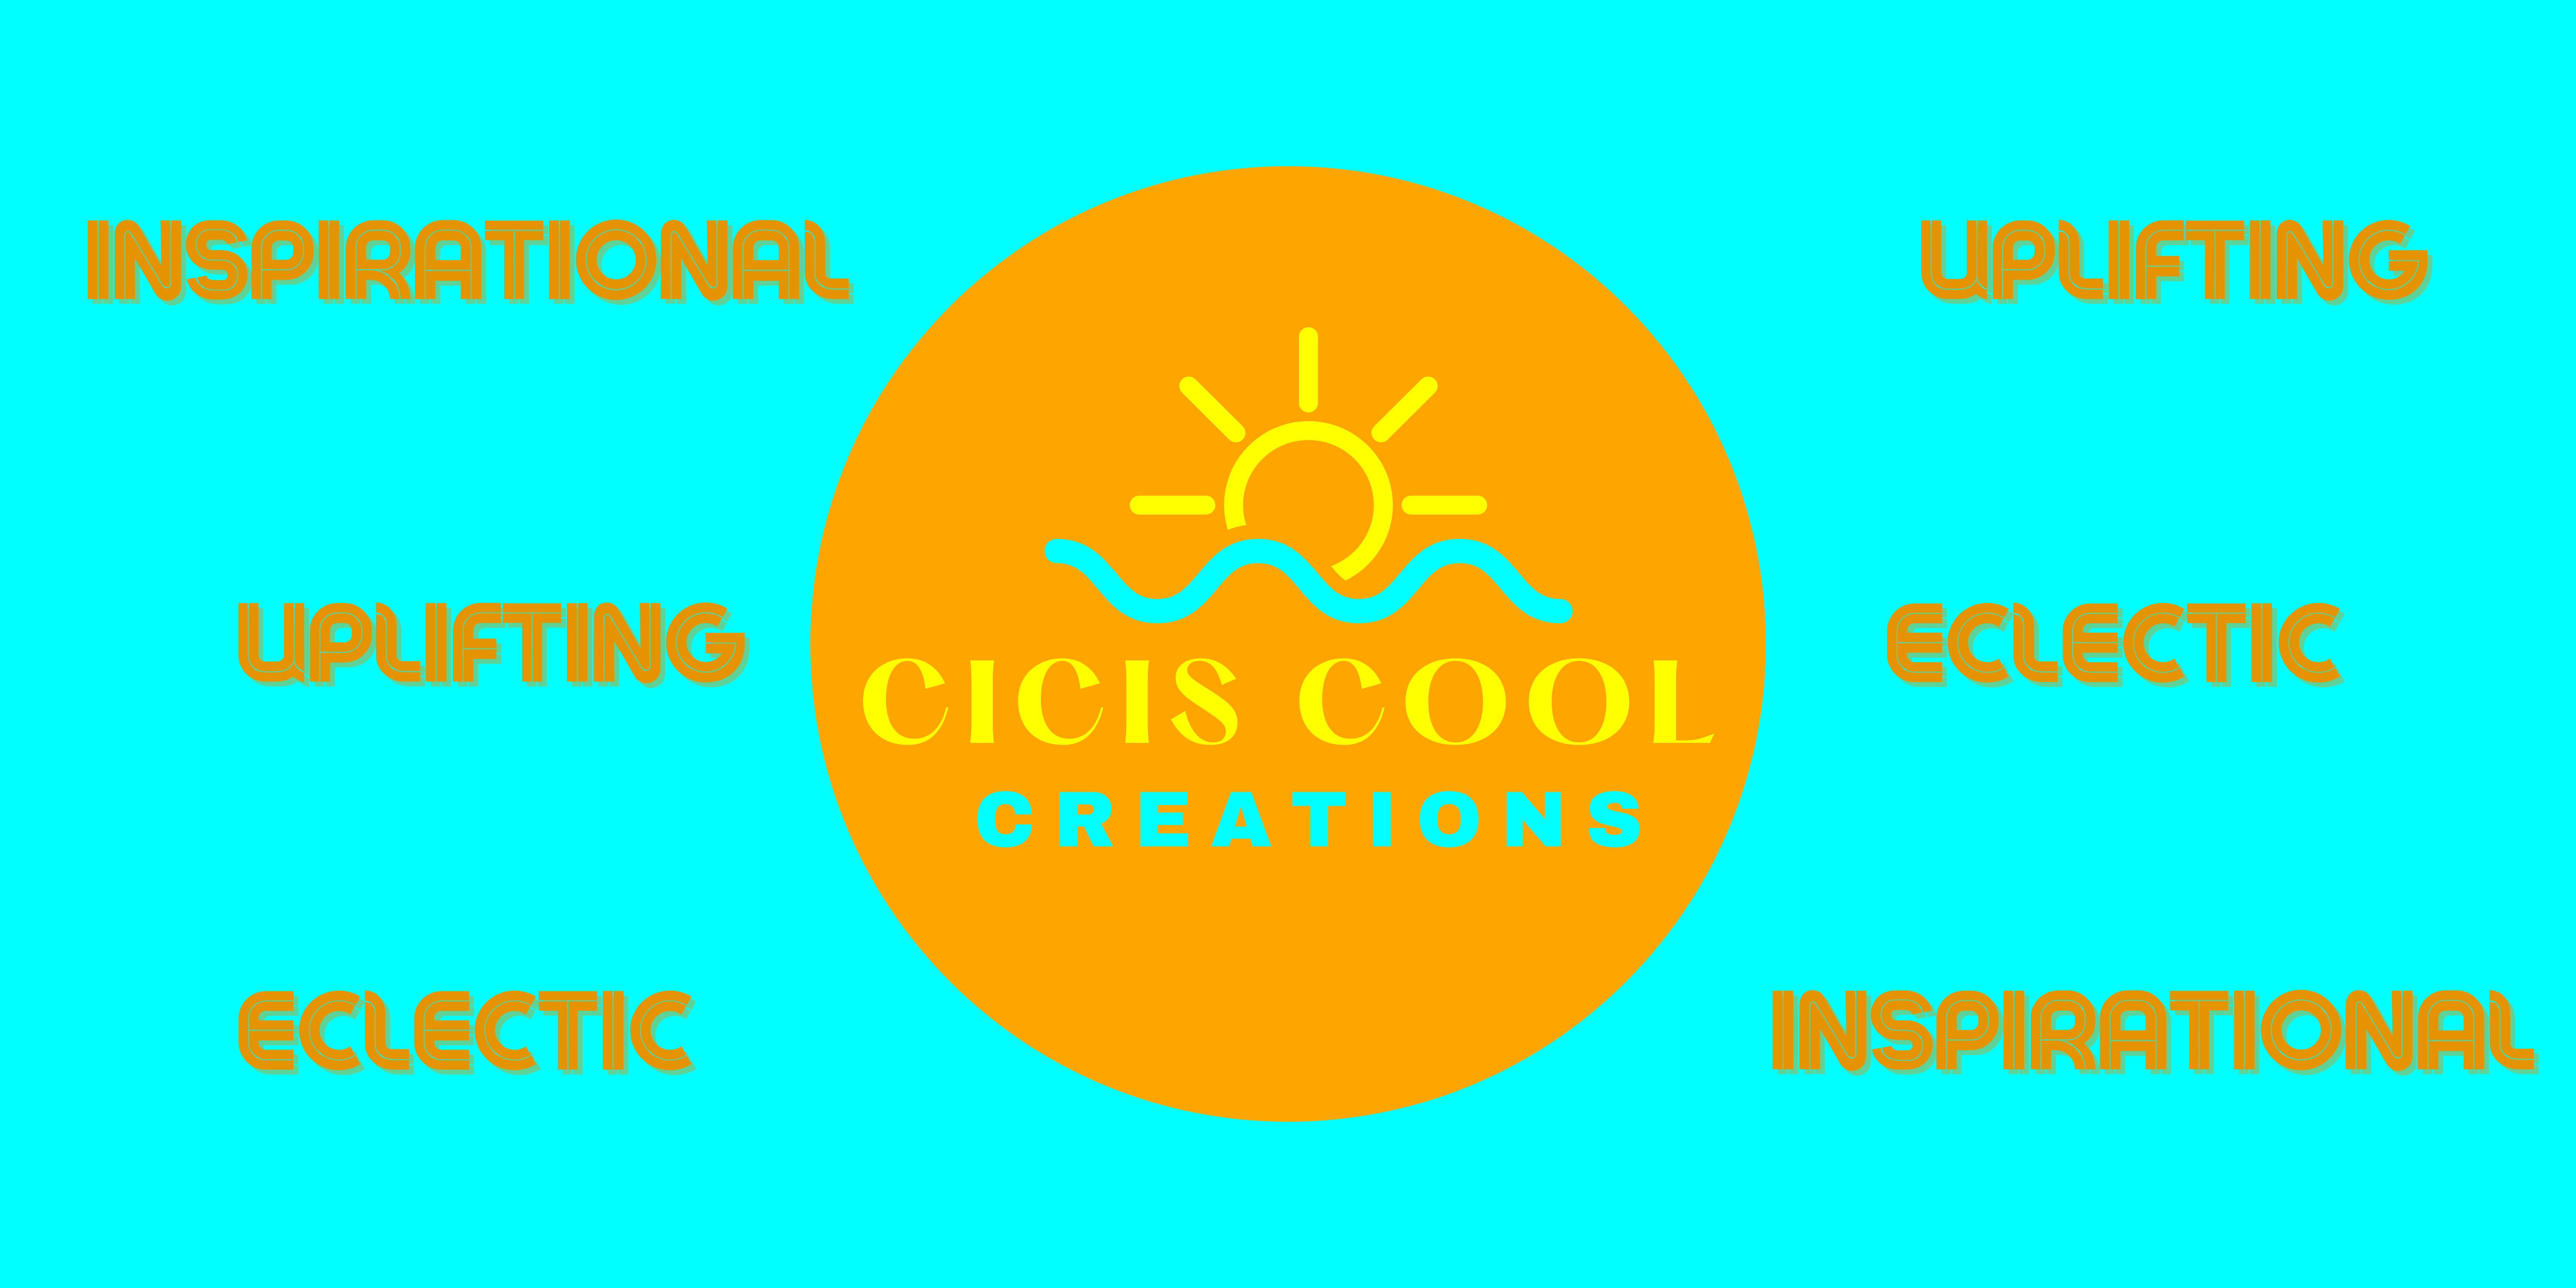 Cicis Cool Creations Clothing Store